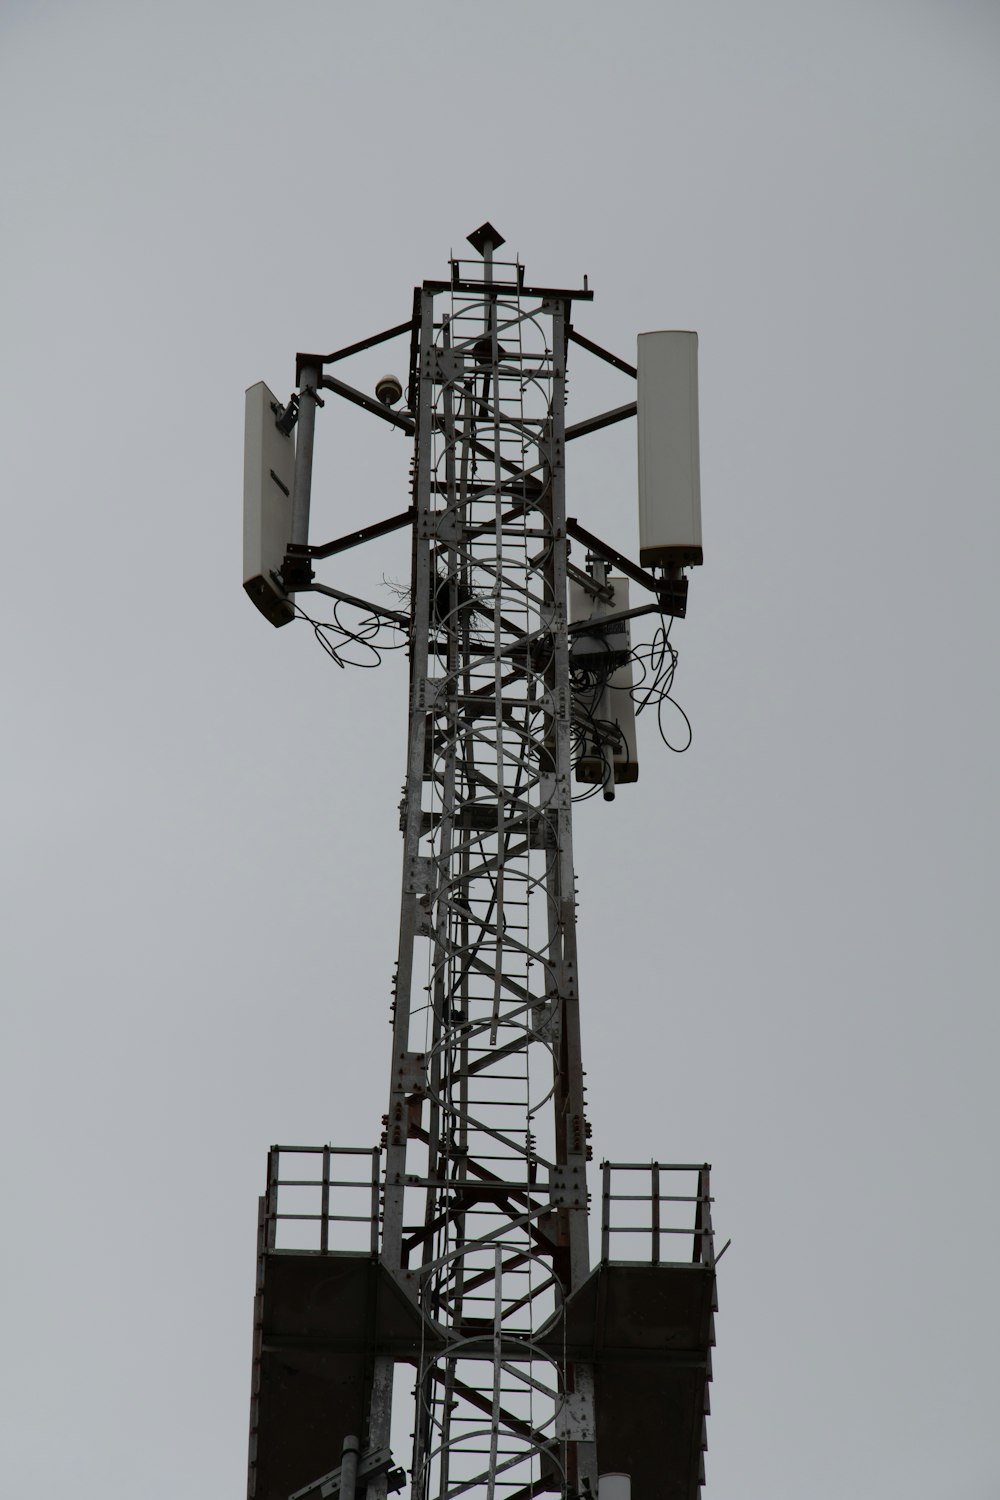 a tall tower with a couple of antennas on top of it